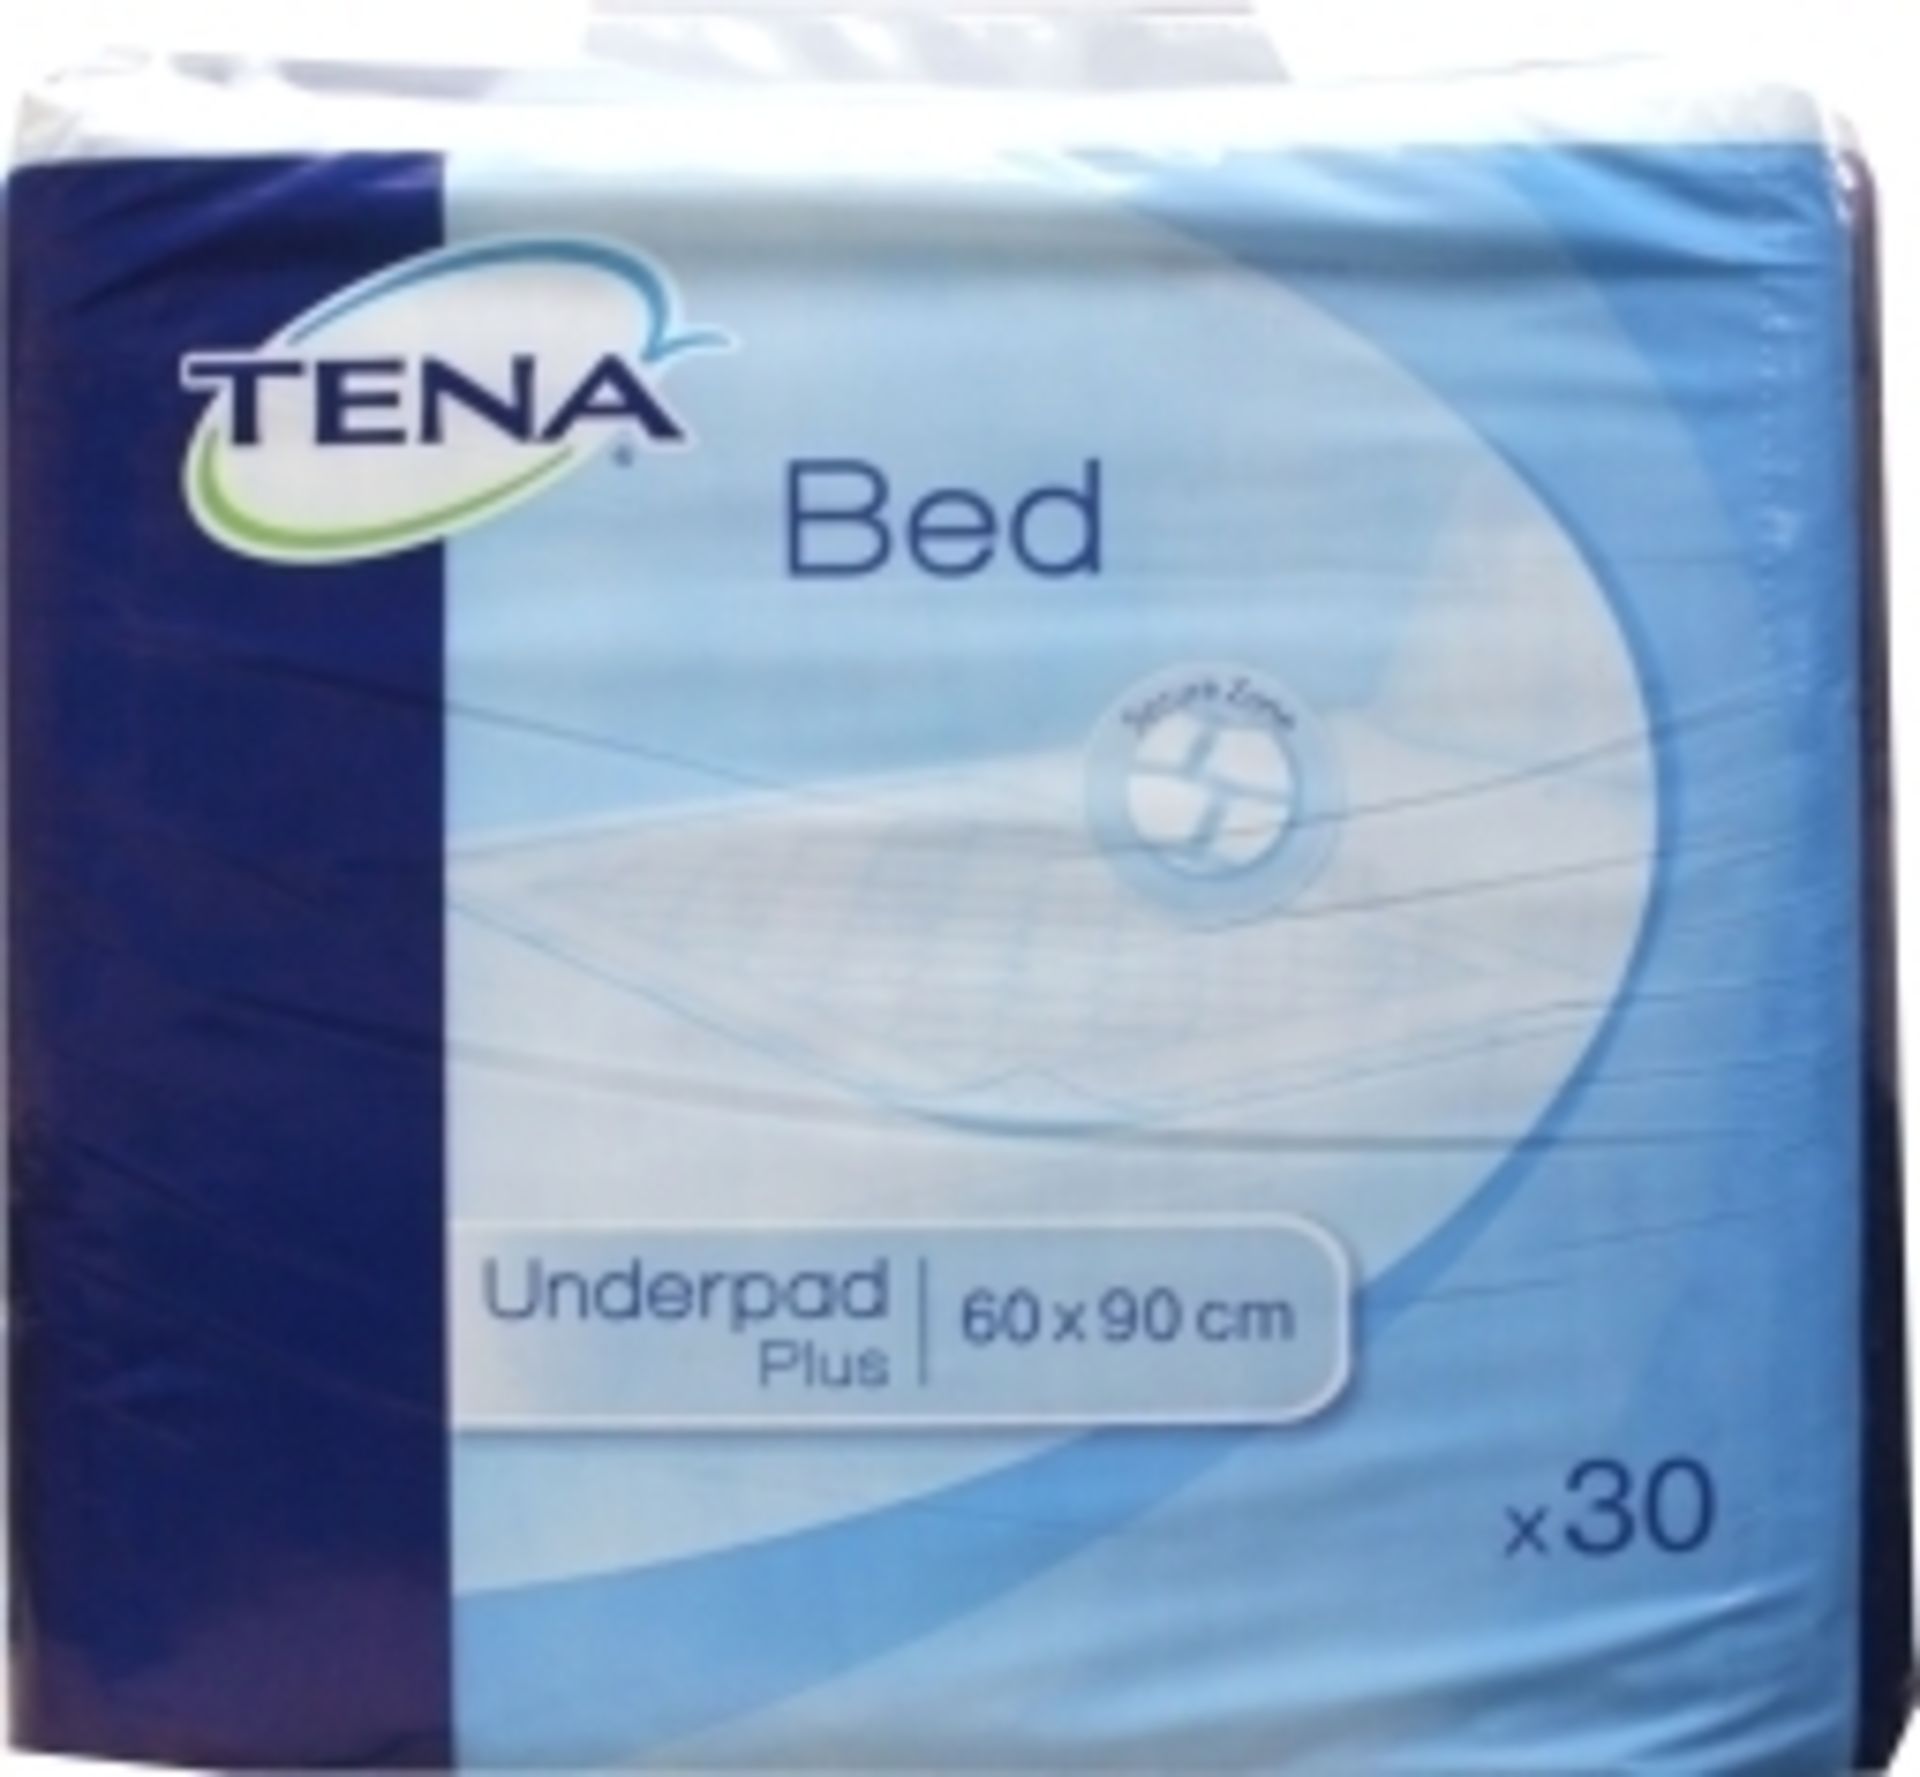 V *TRADE QTY* Brand New Pack 30 Tena Bed Underpad Plus 60 X 9cm ISP £13.49 (ebay) X 3 YOUR BID PRICE